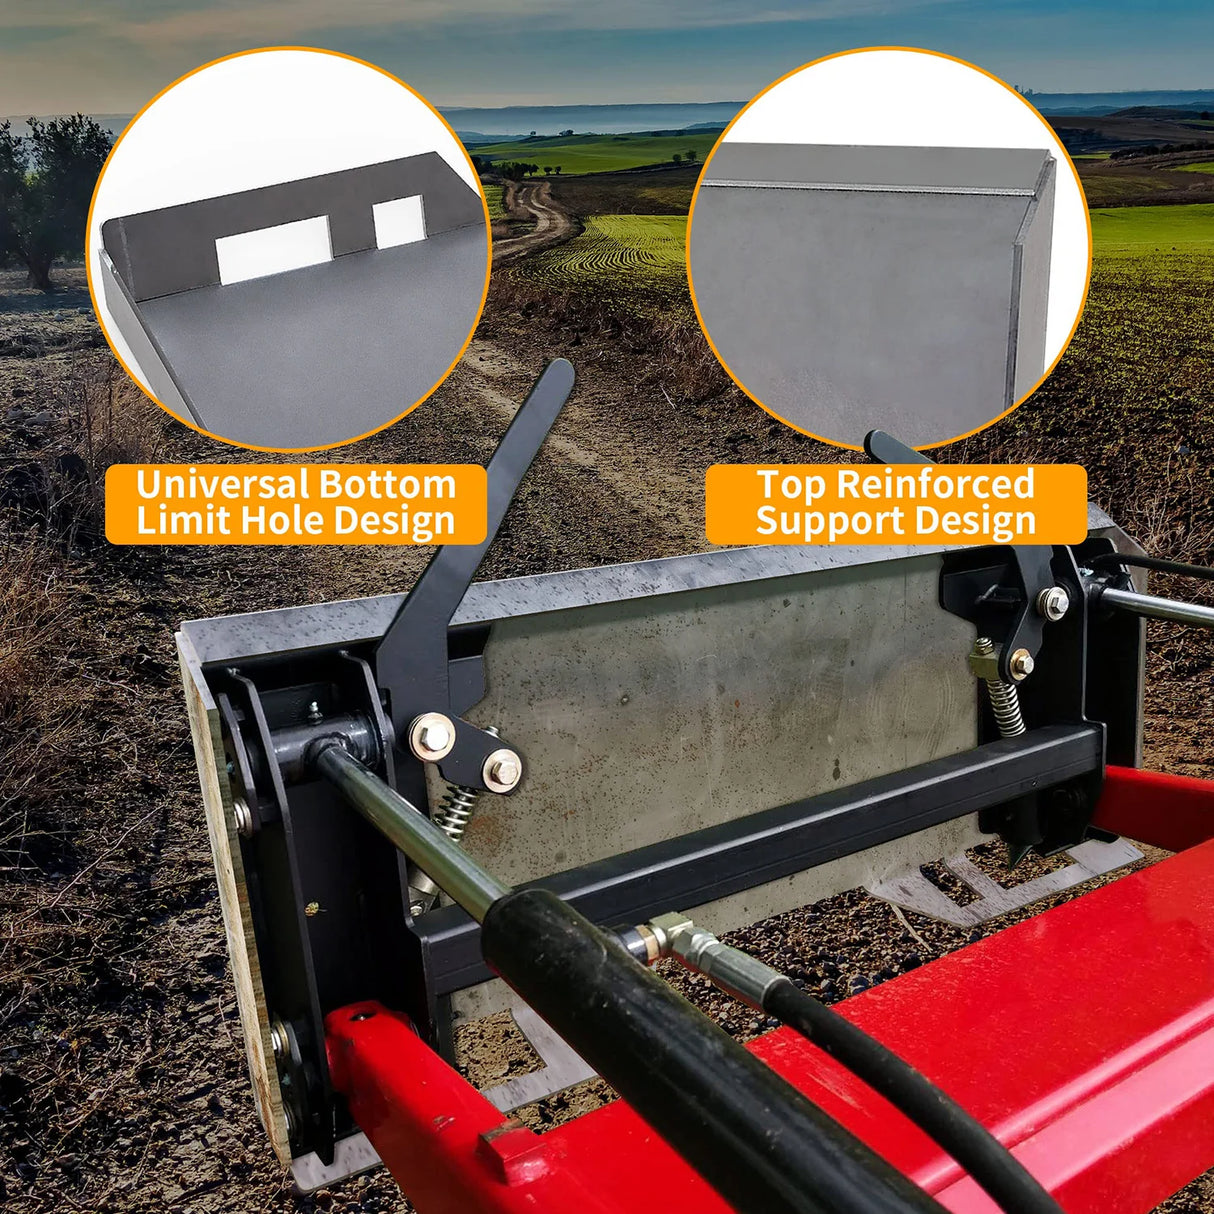 3/8" Skid Steer Attachment Plate Universal Quick Attach Mount Plate Compatible with Kubota, Bobcat Skid Steers and Tractors